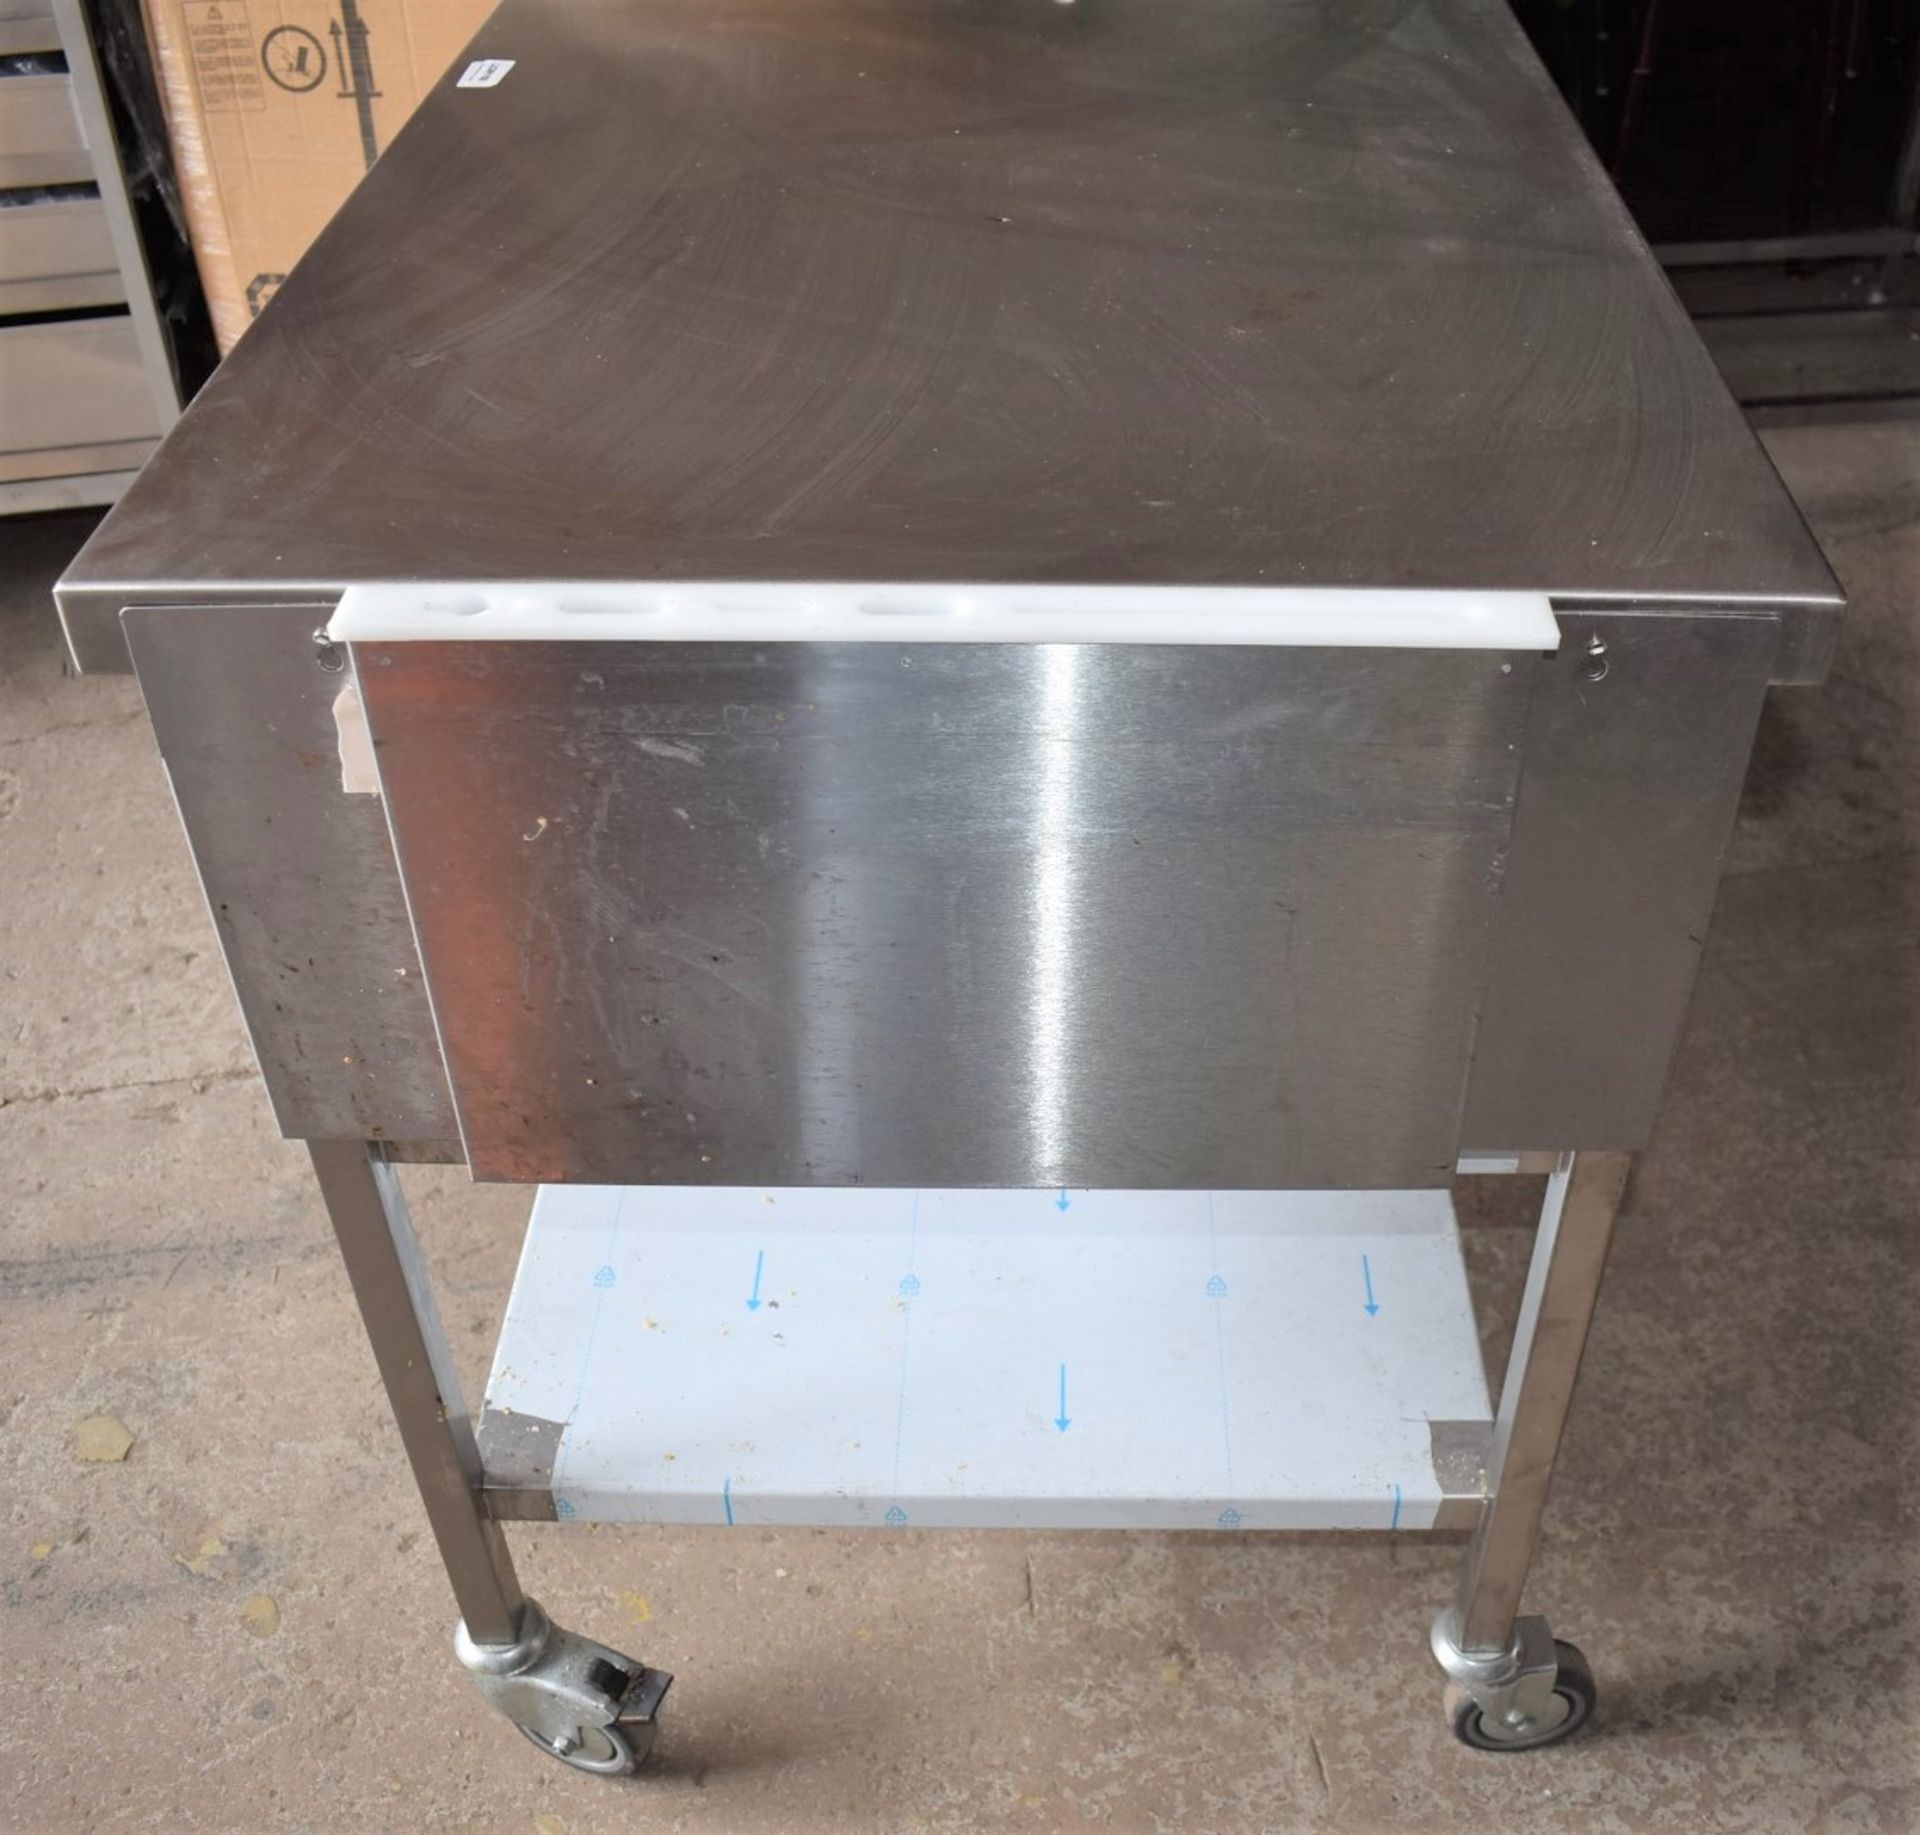 1 x Stainless Steel Prep Table, With Undershelves, Castor Wheels and Knife Block - Still Has - Image 3 of 10